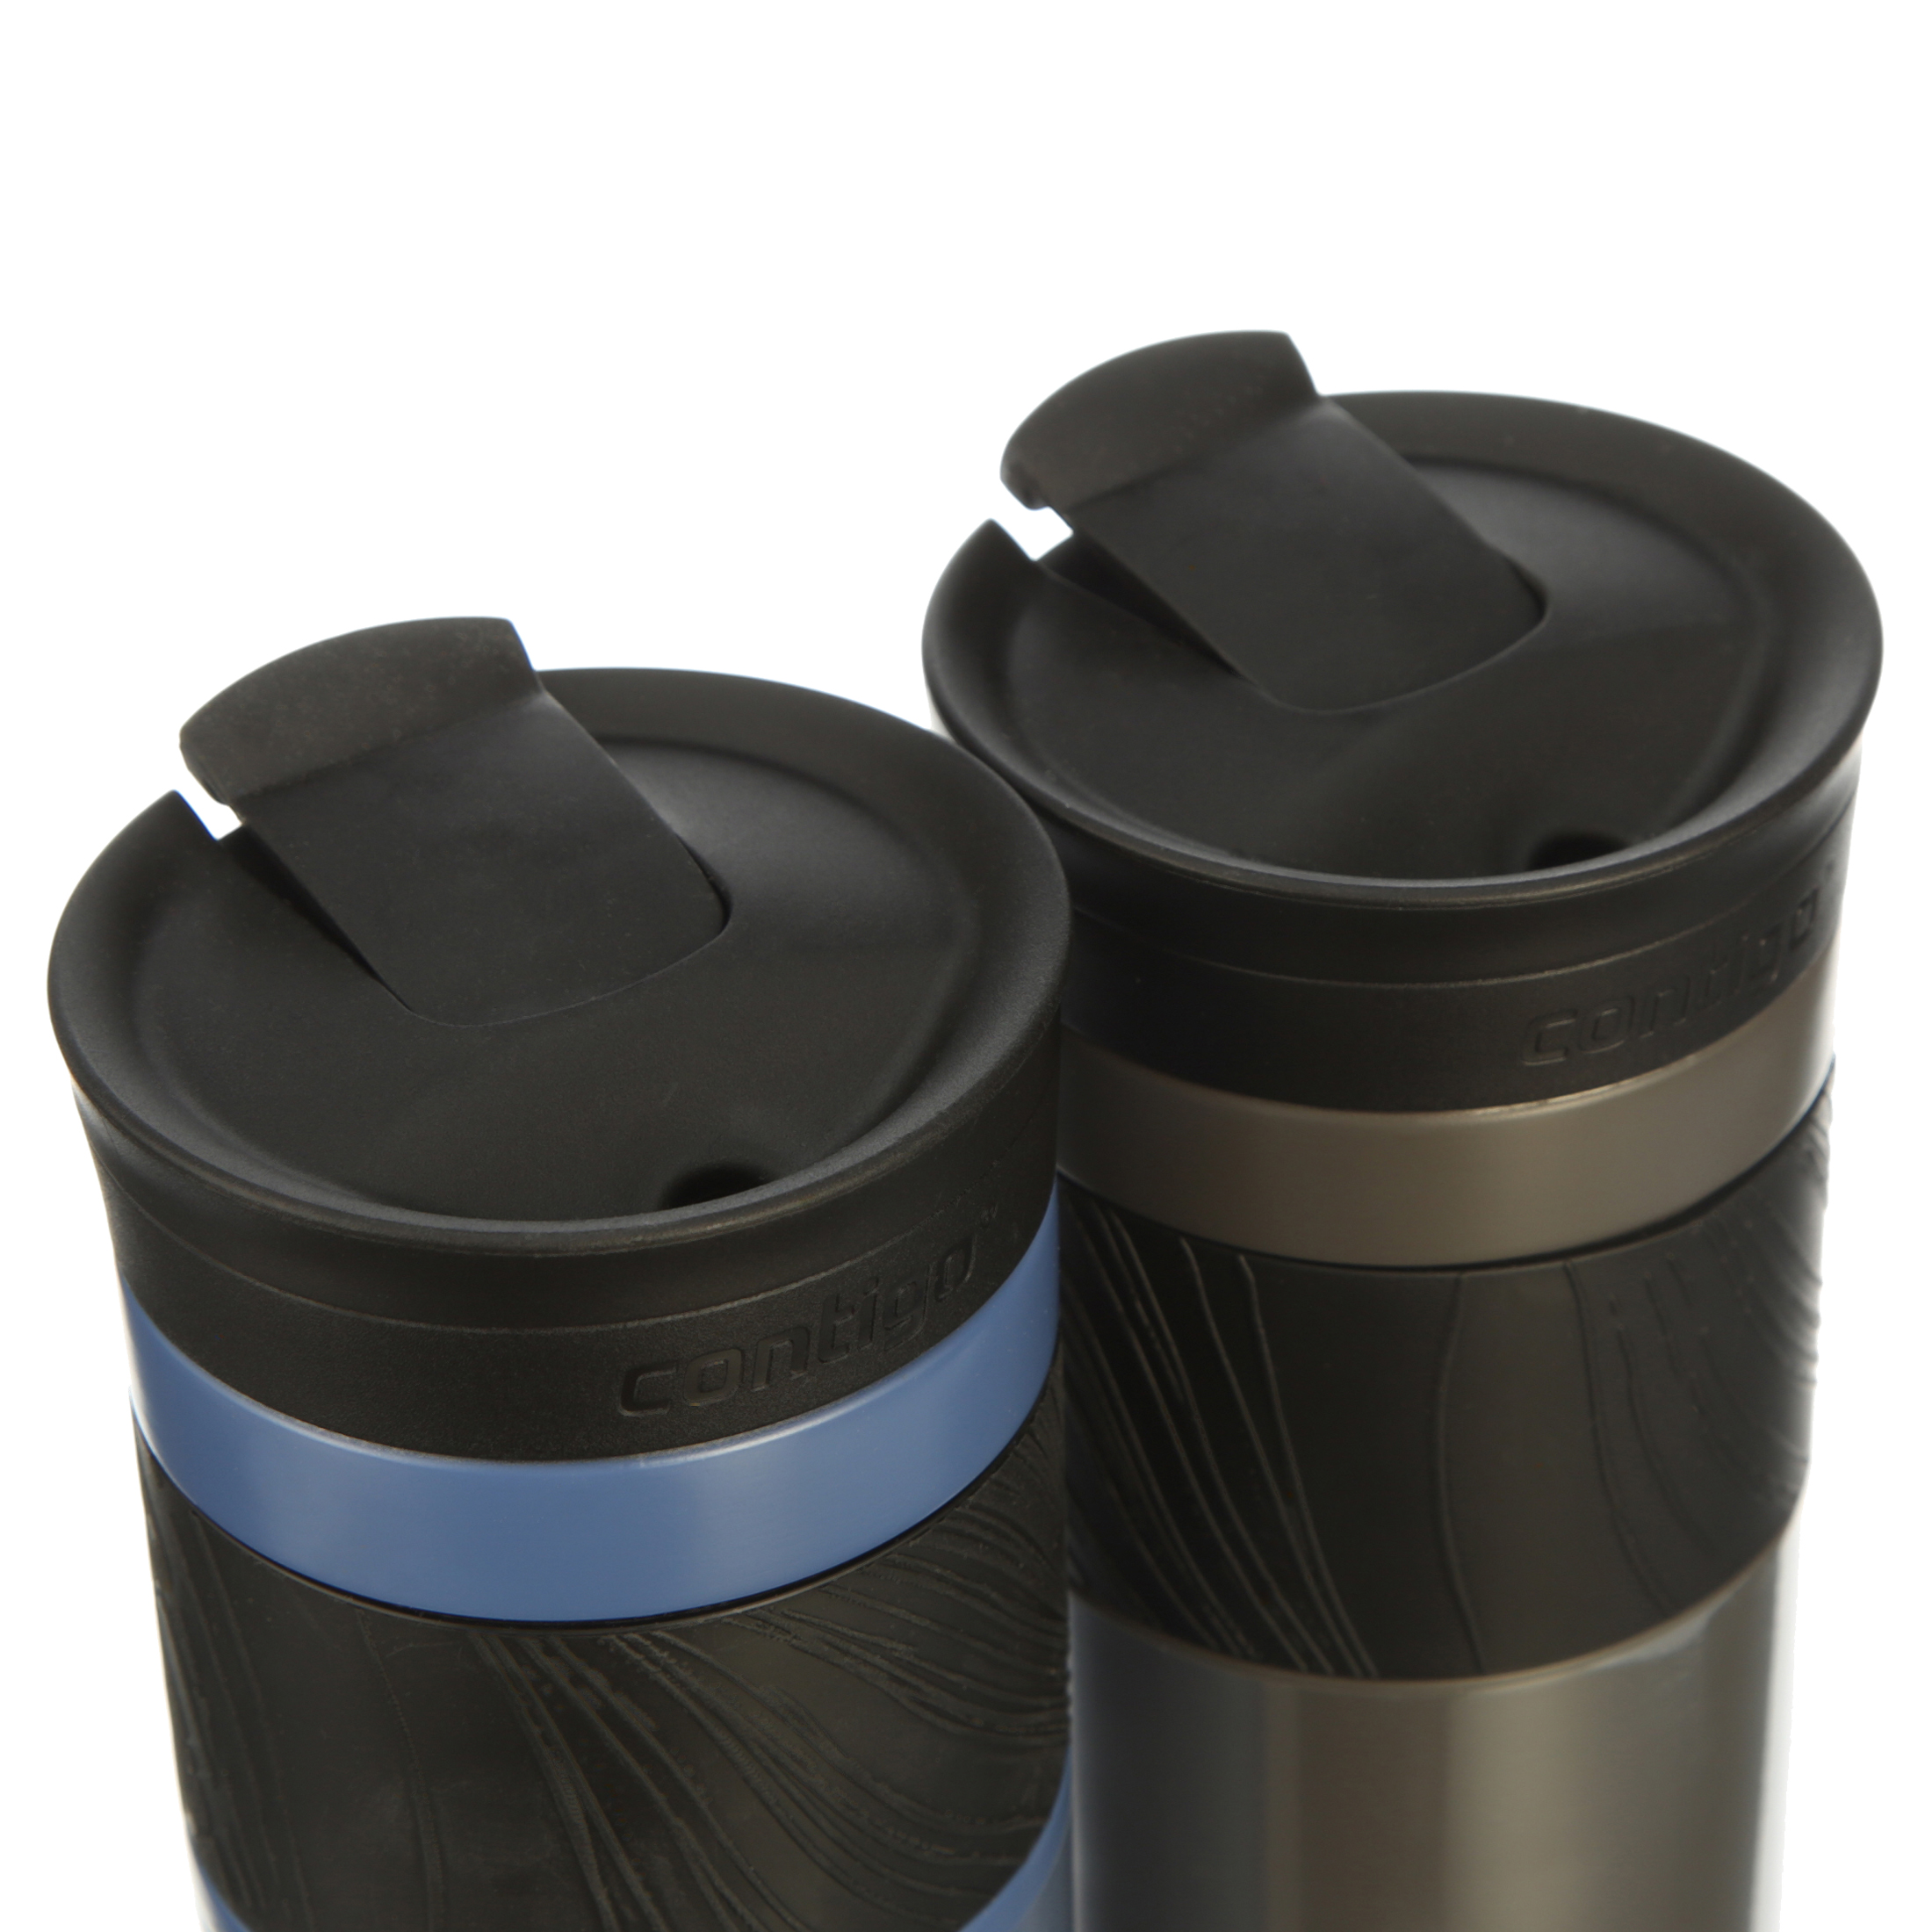 Contigo Byron 2.0 Stainless Steel Travel Mug with SNAPSEAL Lid and Grip Sake and Blue Corn, 16 fl oz., 2-Pack - image 5 of 11